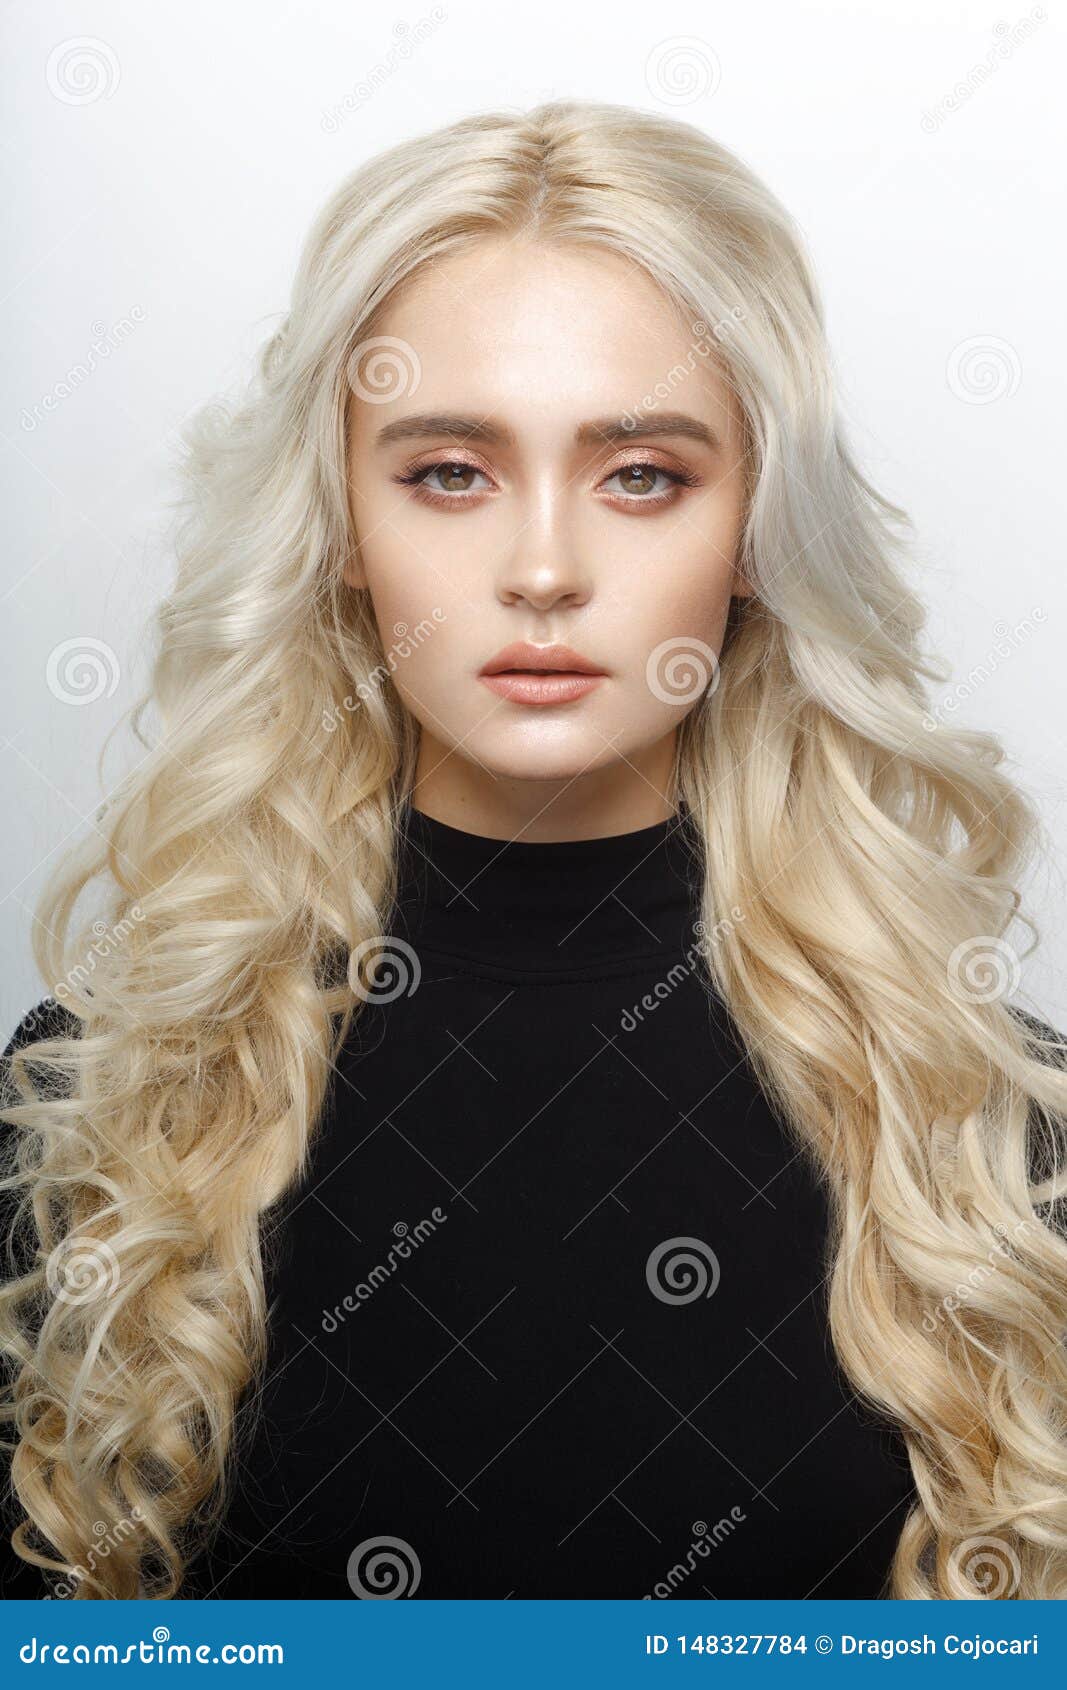 Frontal Portrait Of A Cute Blonde Girl With Delicate Make